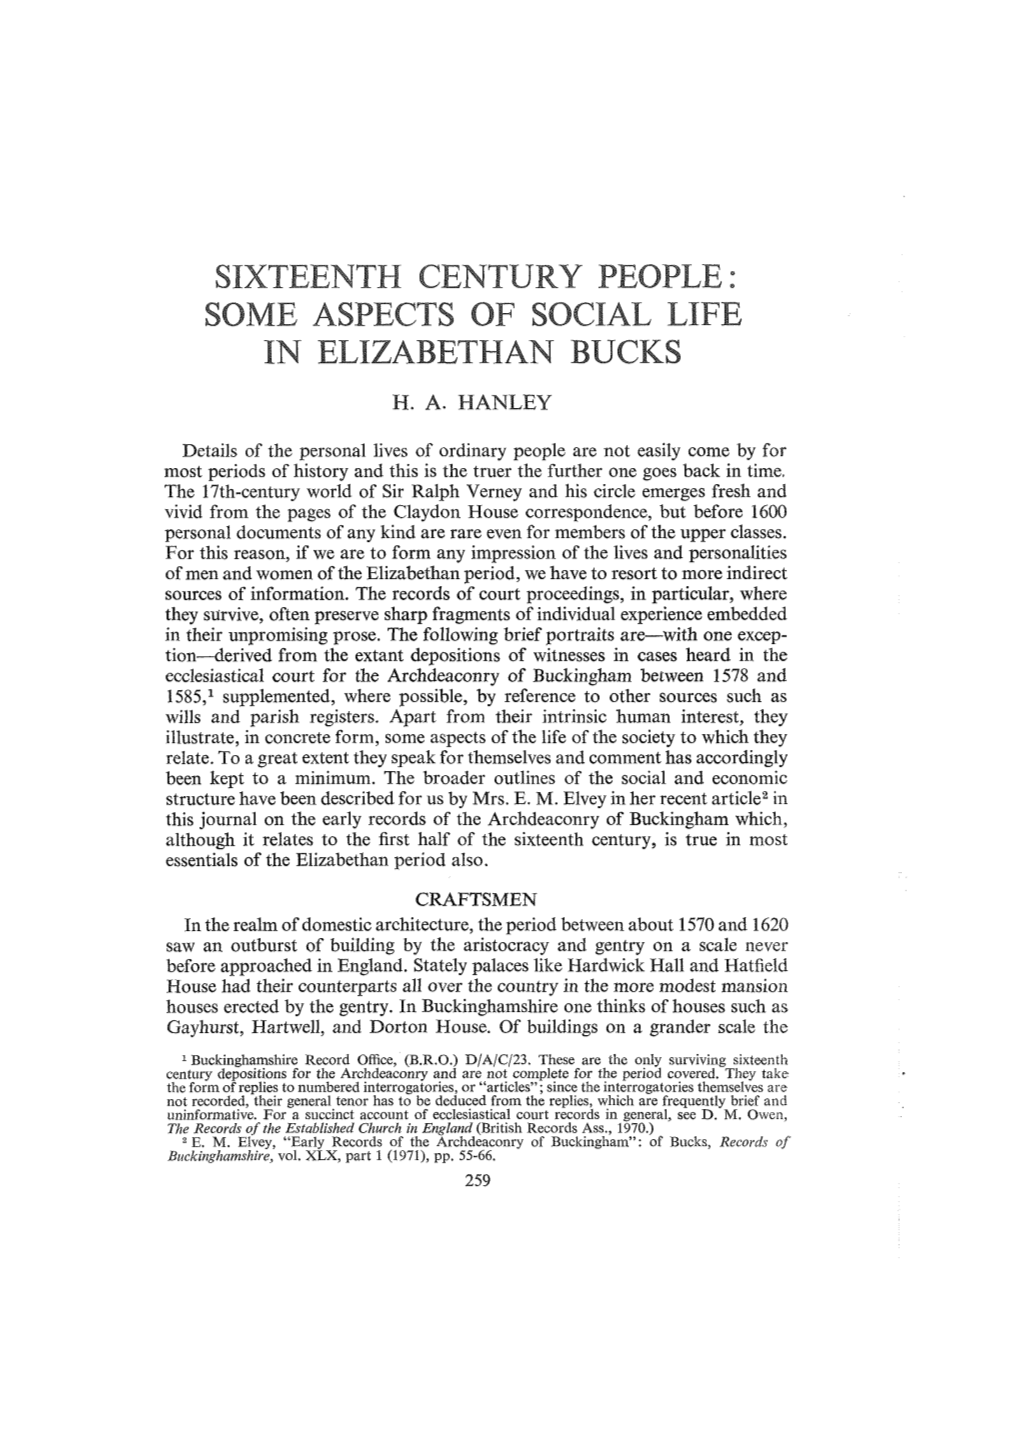 Sixteenth-Century People: Some Aspects of Social Life in Elizabethan